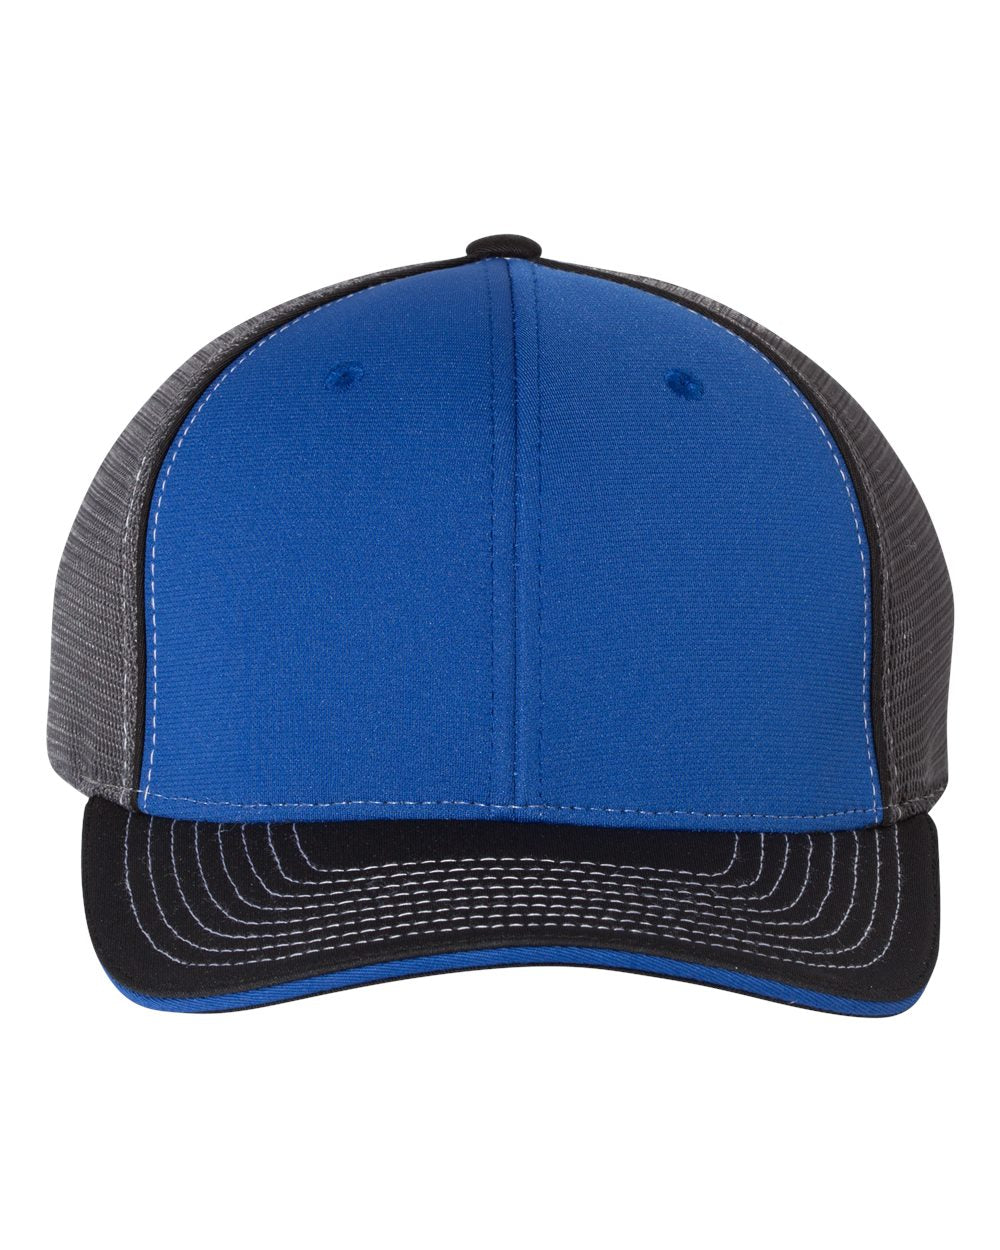 Richardson Fitted Pulse Sportmesh with R-Flex Cap 172 #color_Royal/ Charcoal/ Black Tri